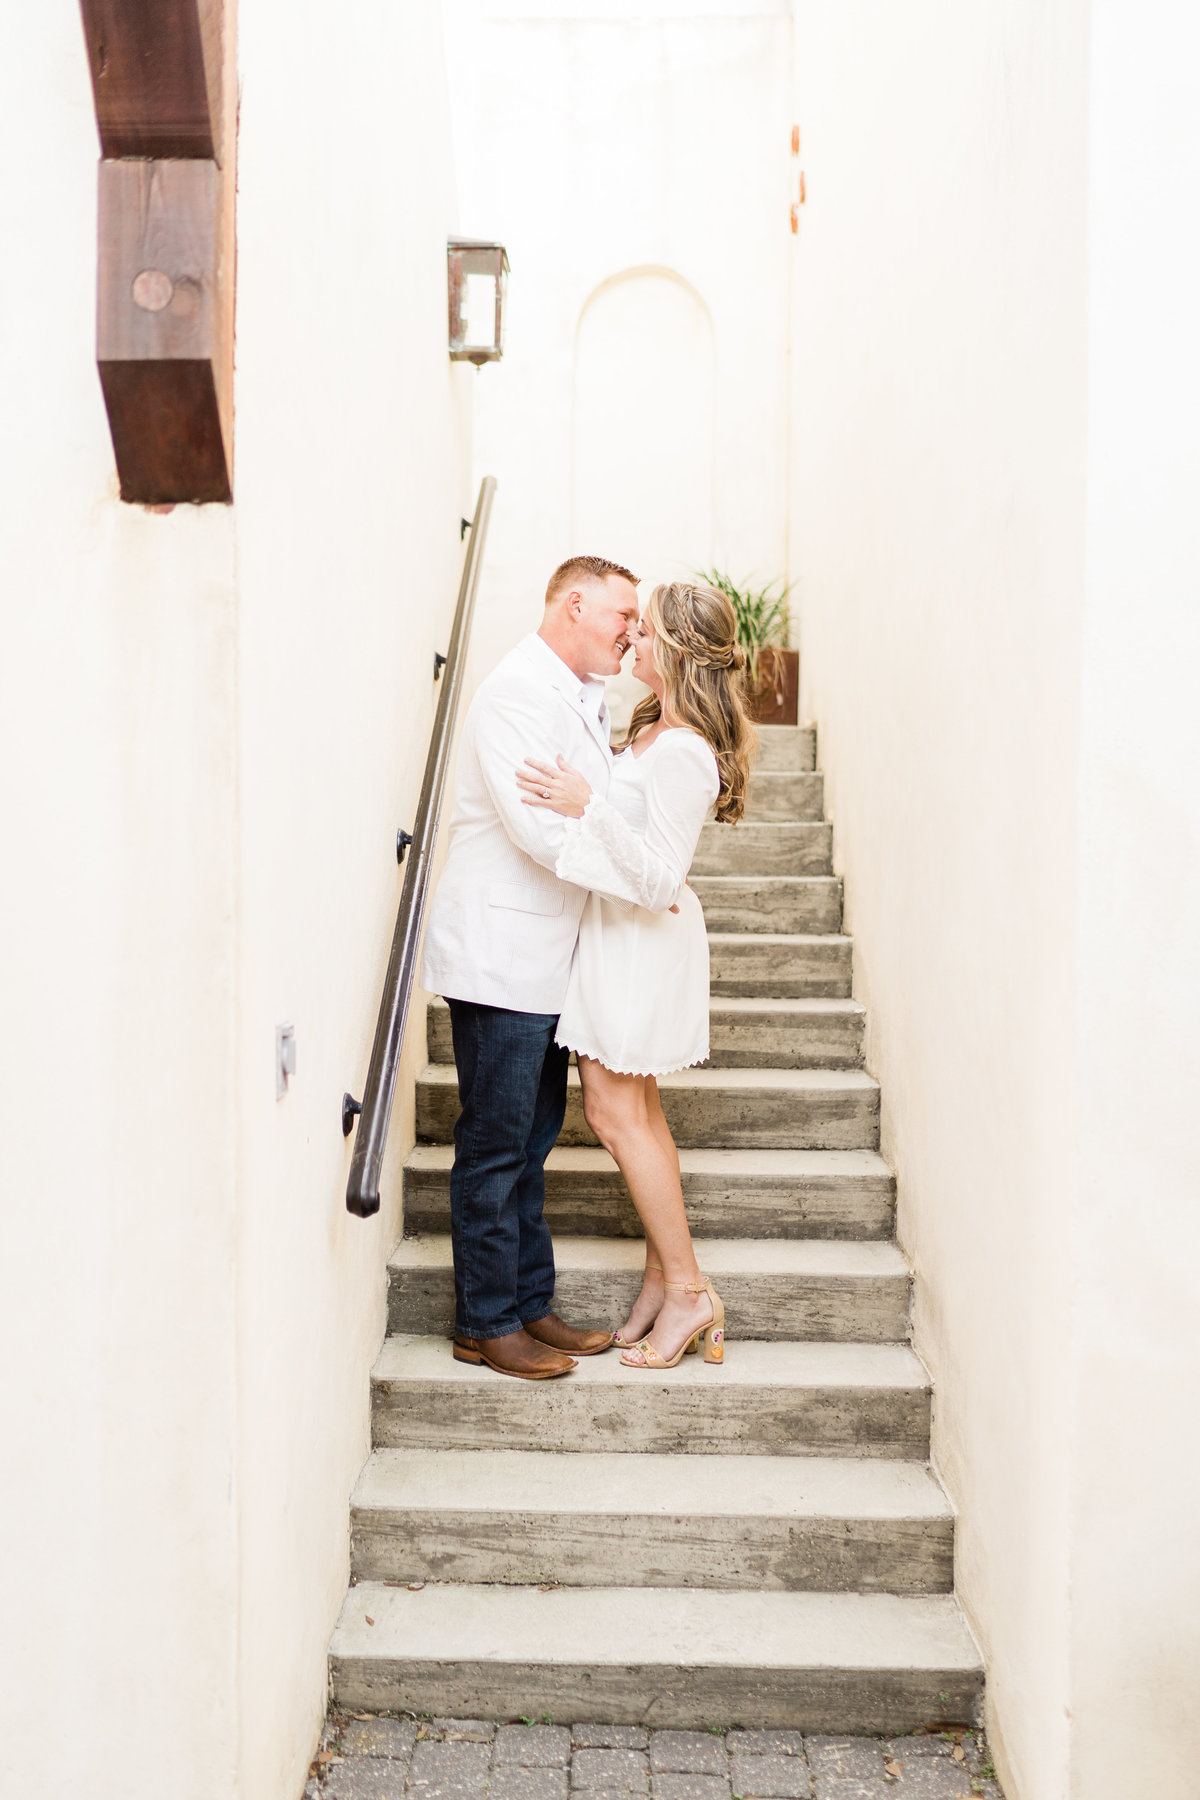 Couple posing on stairs for engagement photoshoot in Alabama